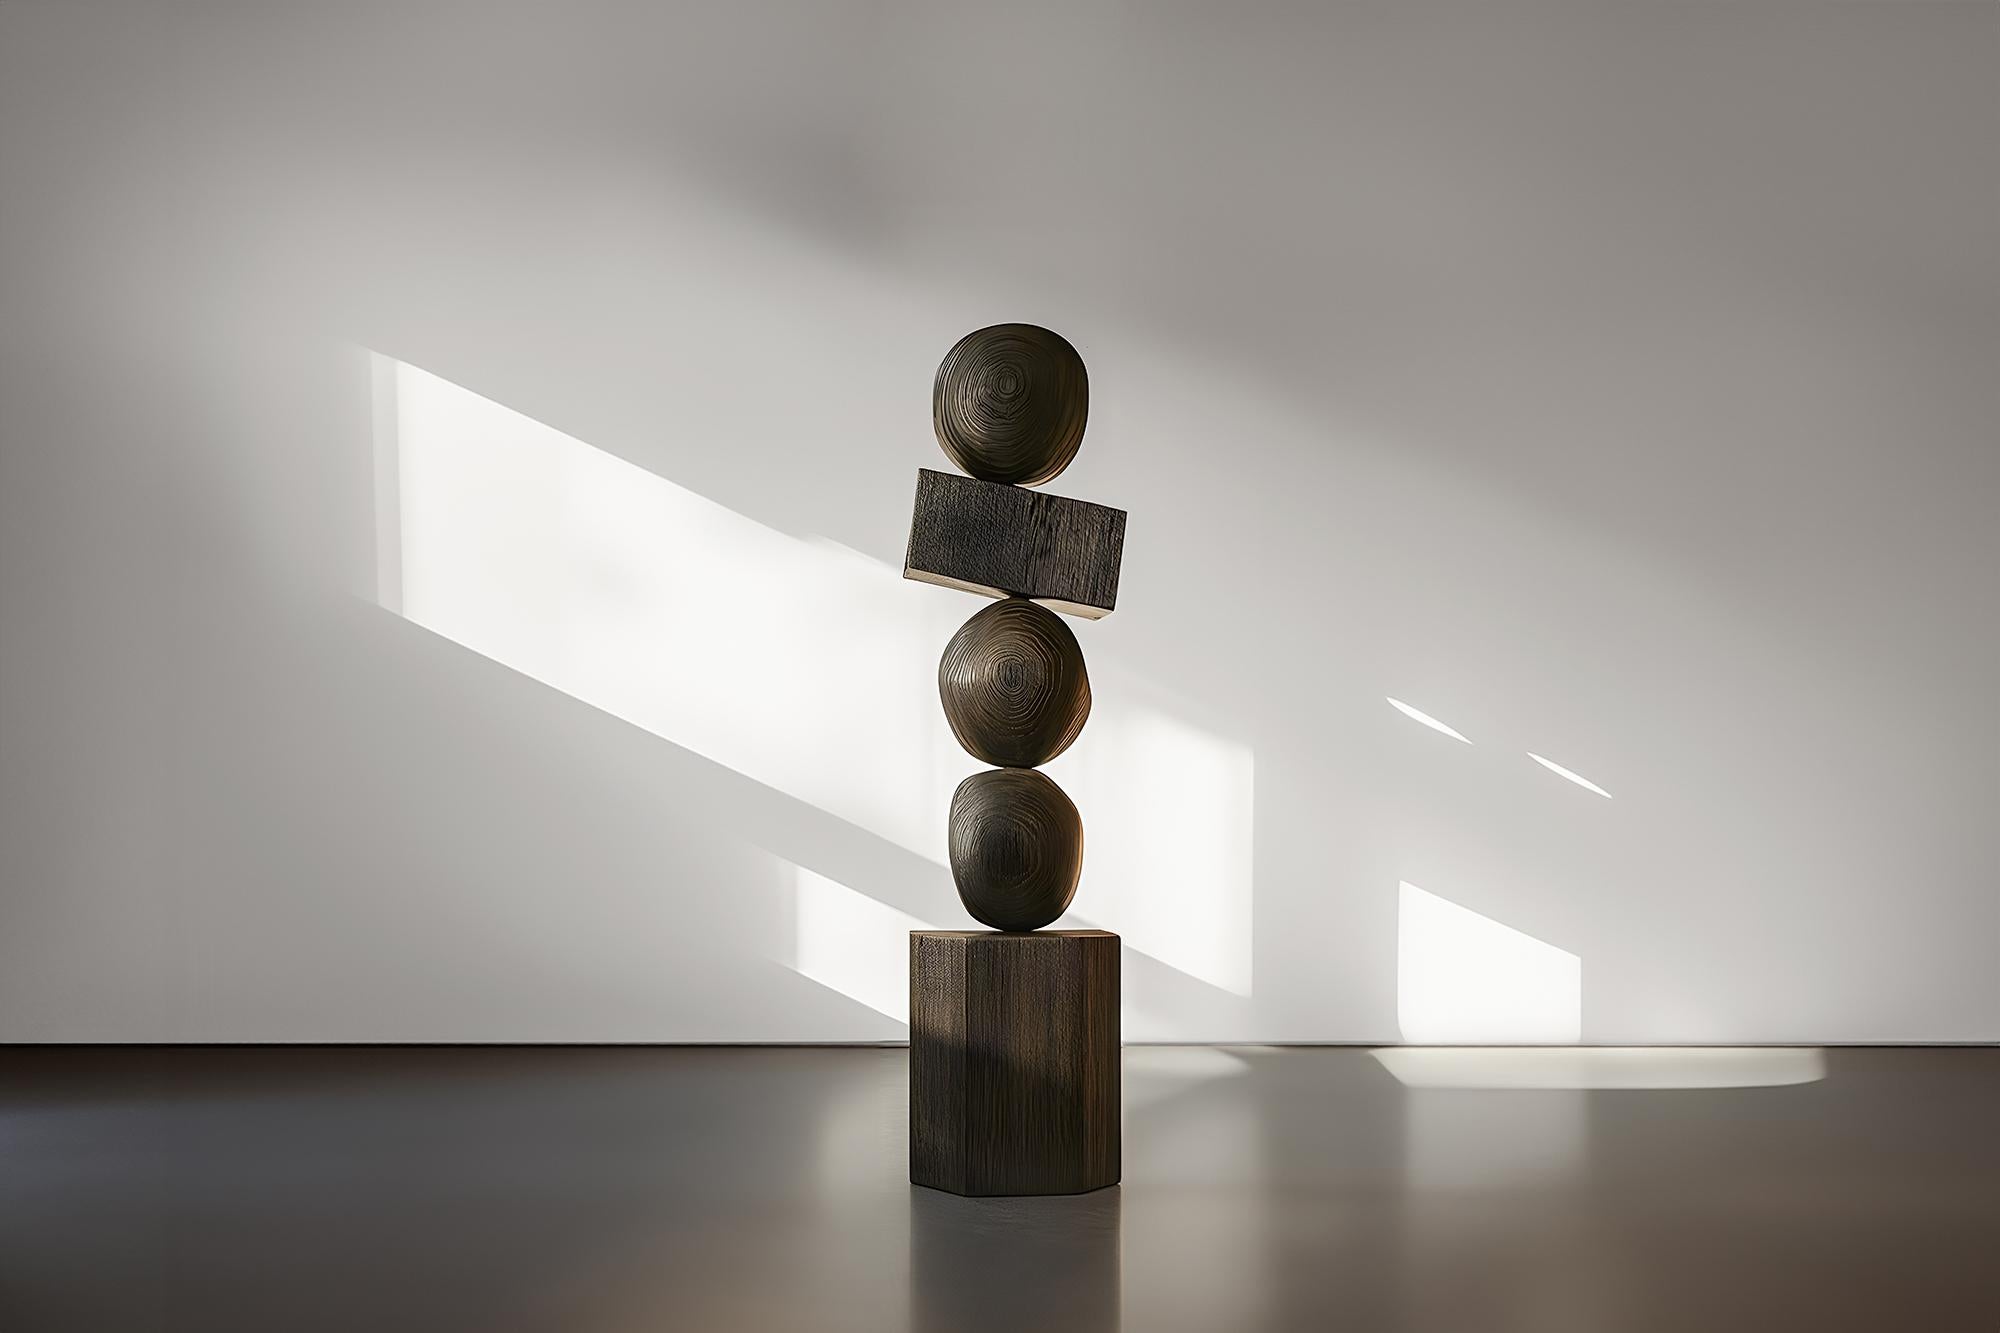 Sleek and Dark, Joel Escalona's Burned Oak Totem Emerges, Still Stand No92
——


Joel Escalona's wooden standing sculptures are objects of raw beauty and serene grace. Each one is a testament to the power of the material, with smooth curves that flow